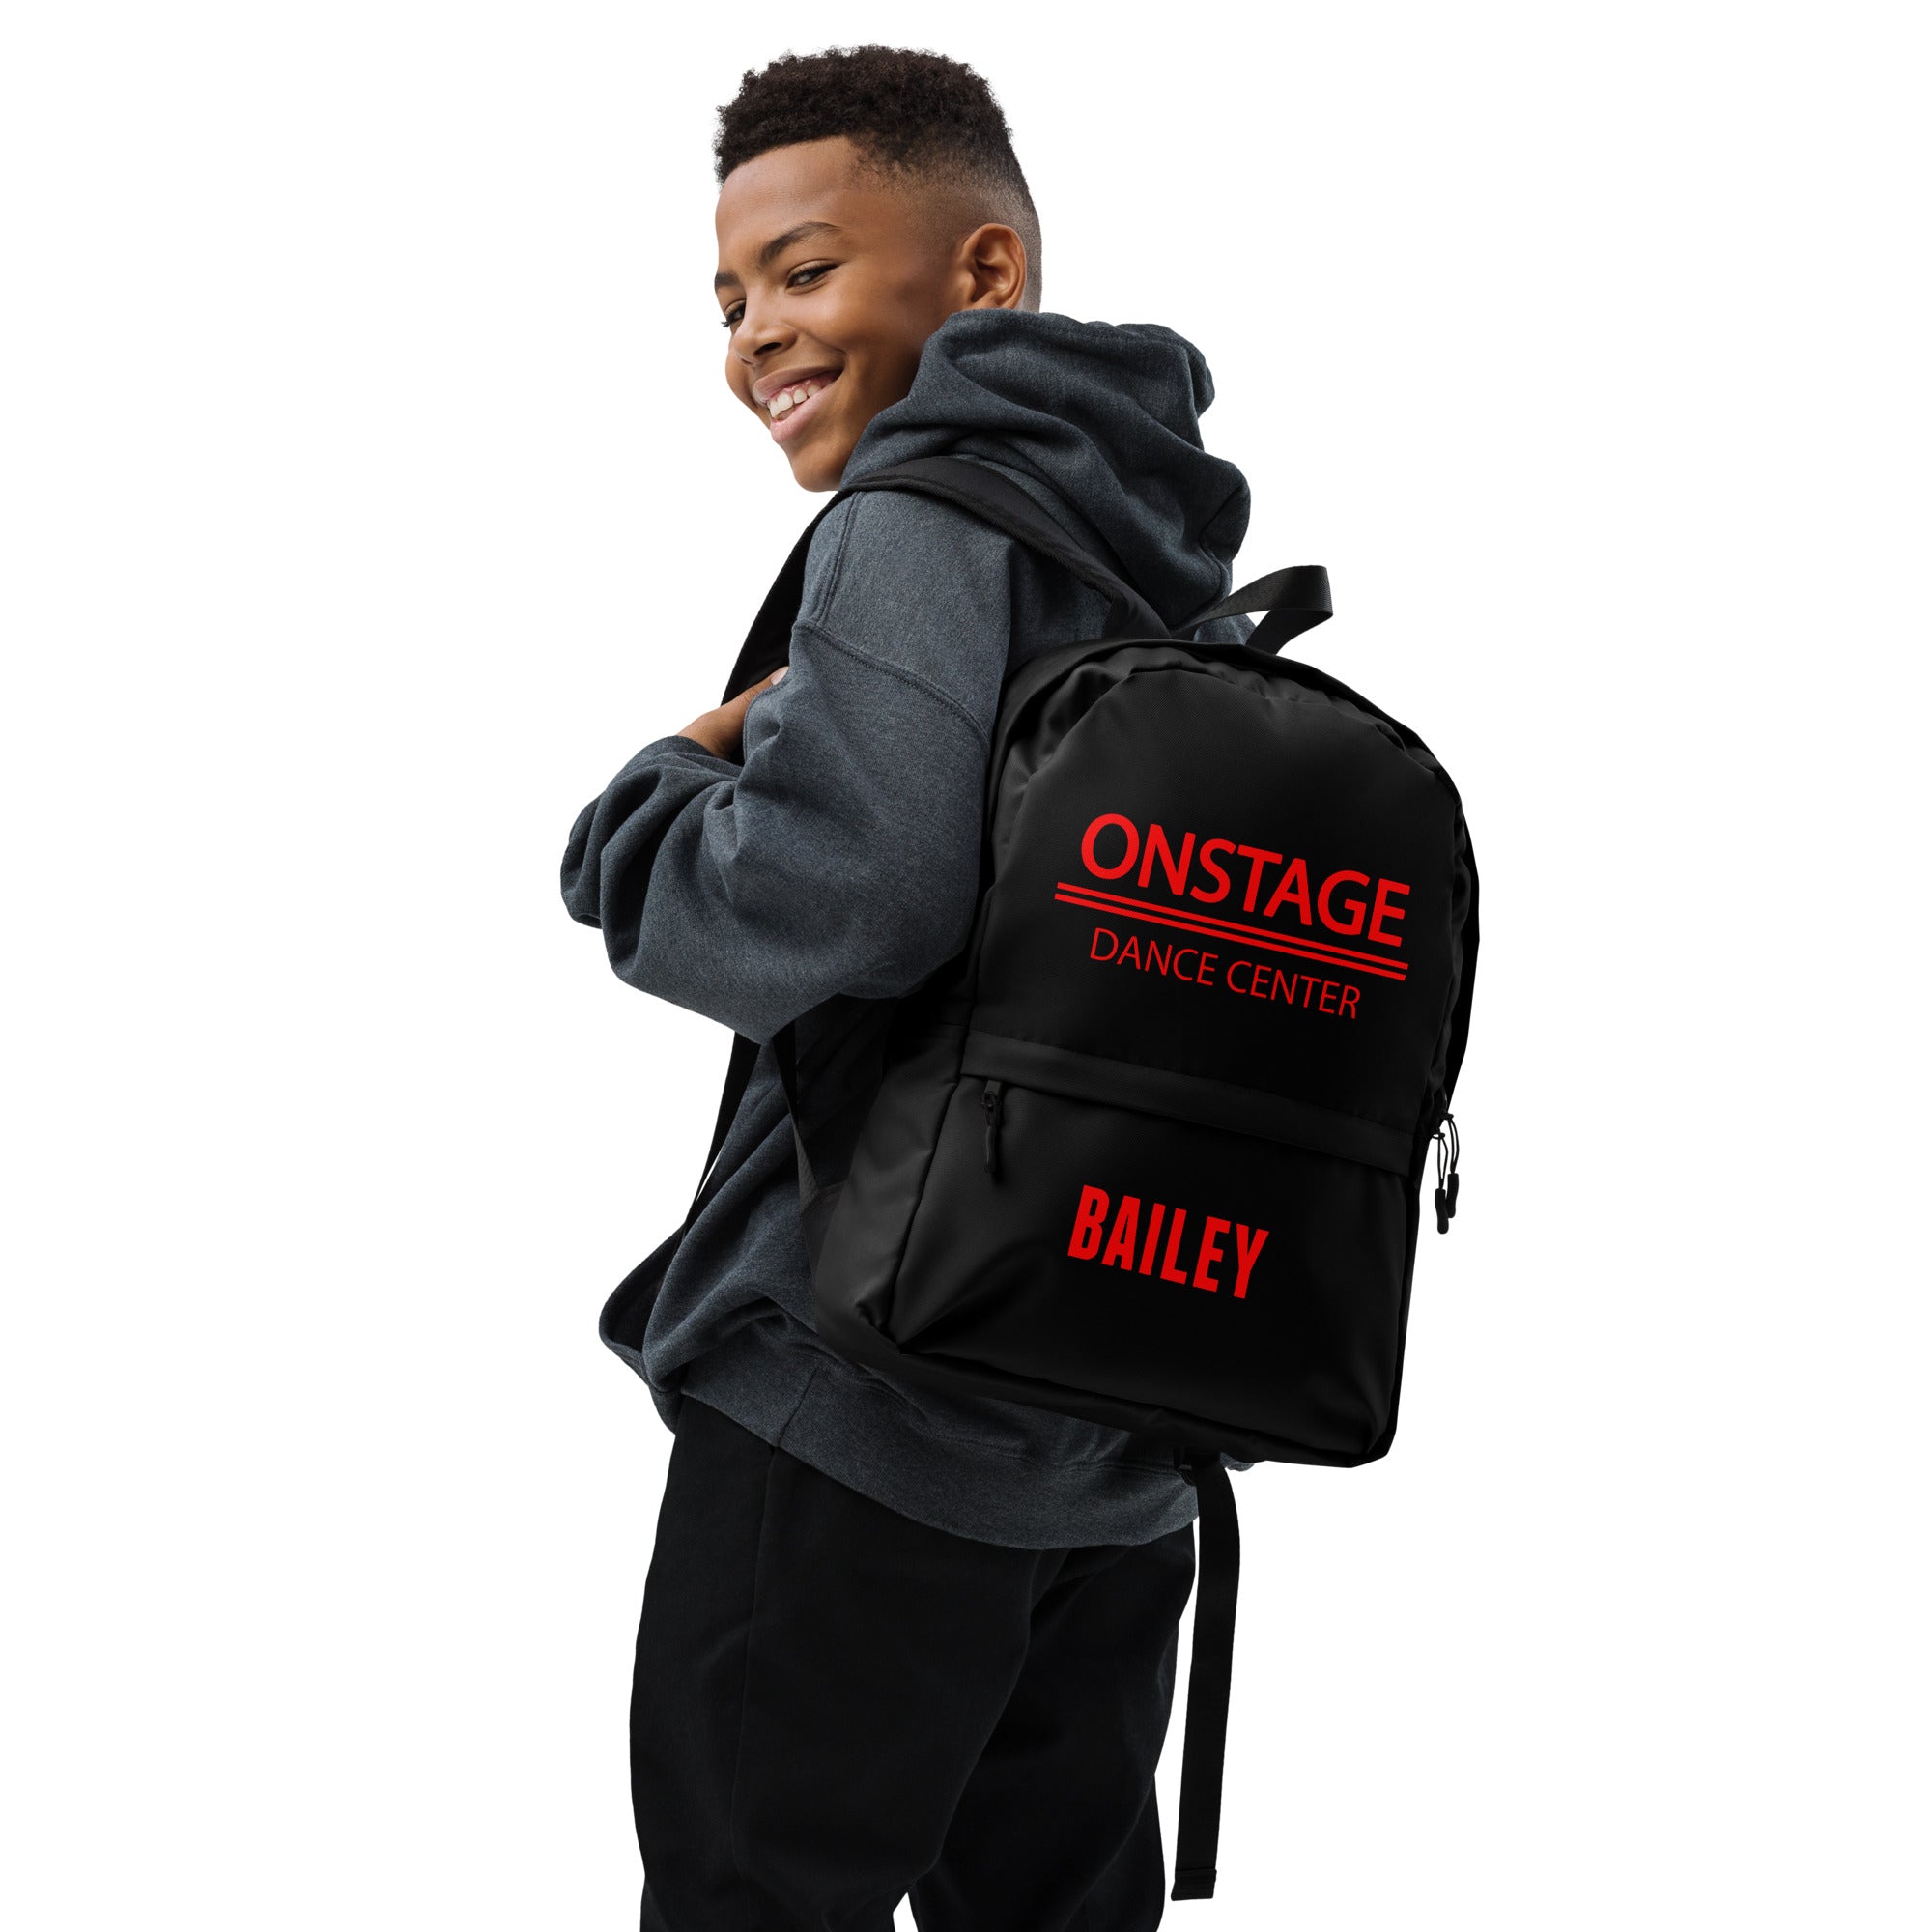 BAILEY ONSTAGE red name print Backpack